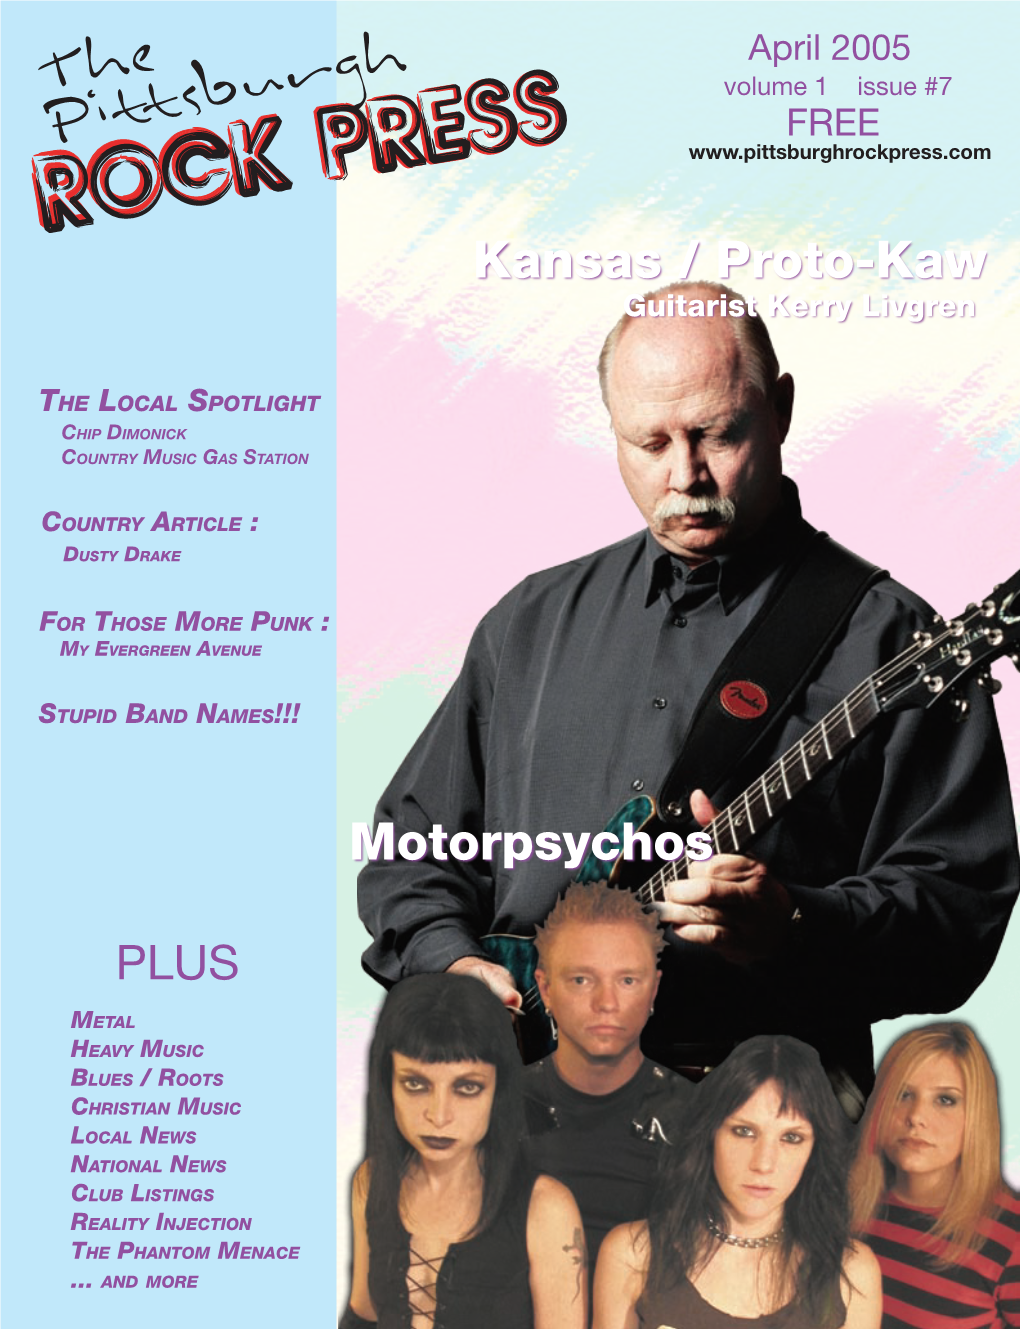 Pittsburgh Rock Press, August 2004 Issue 1